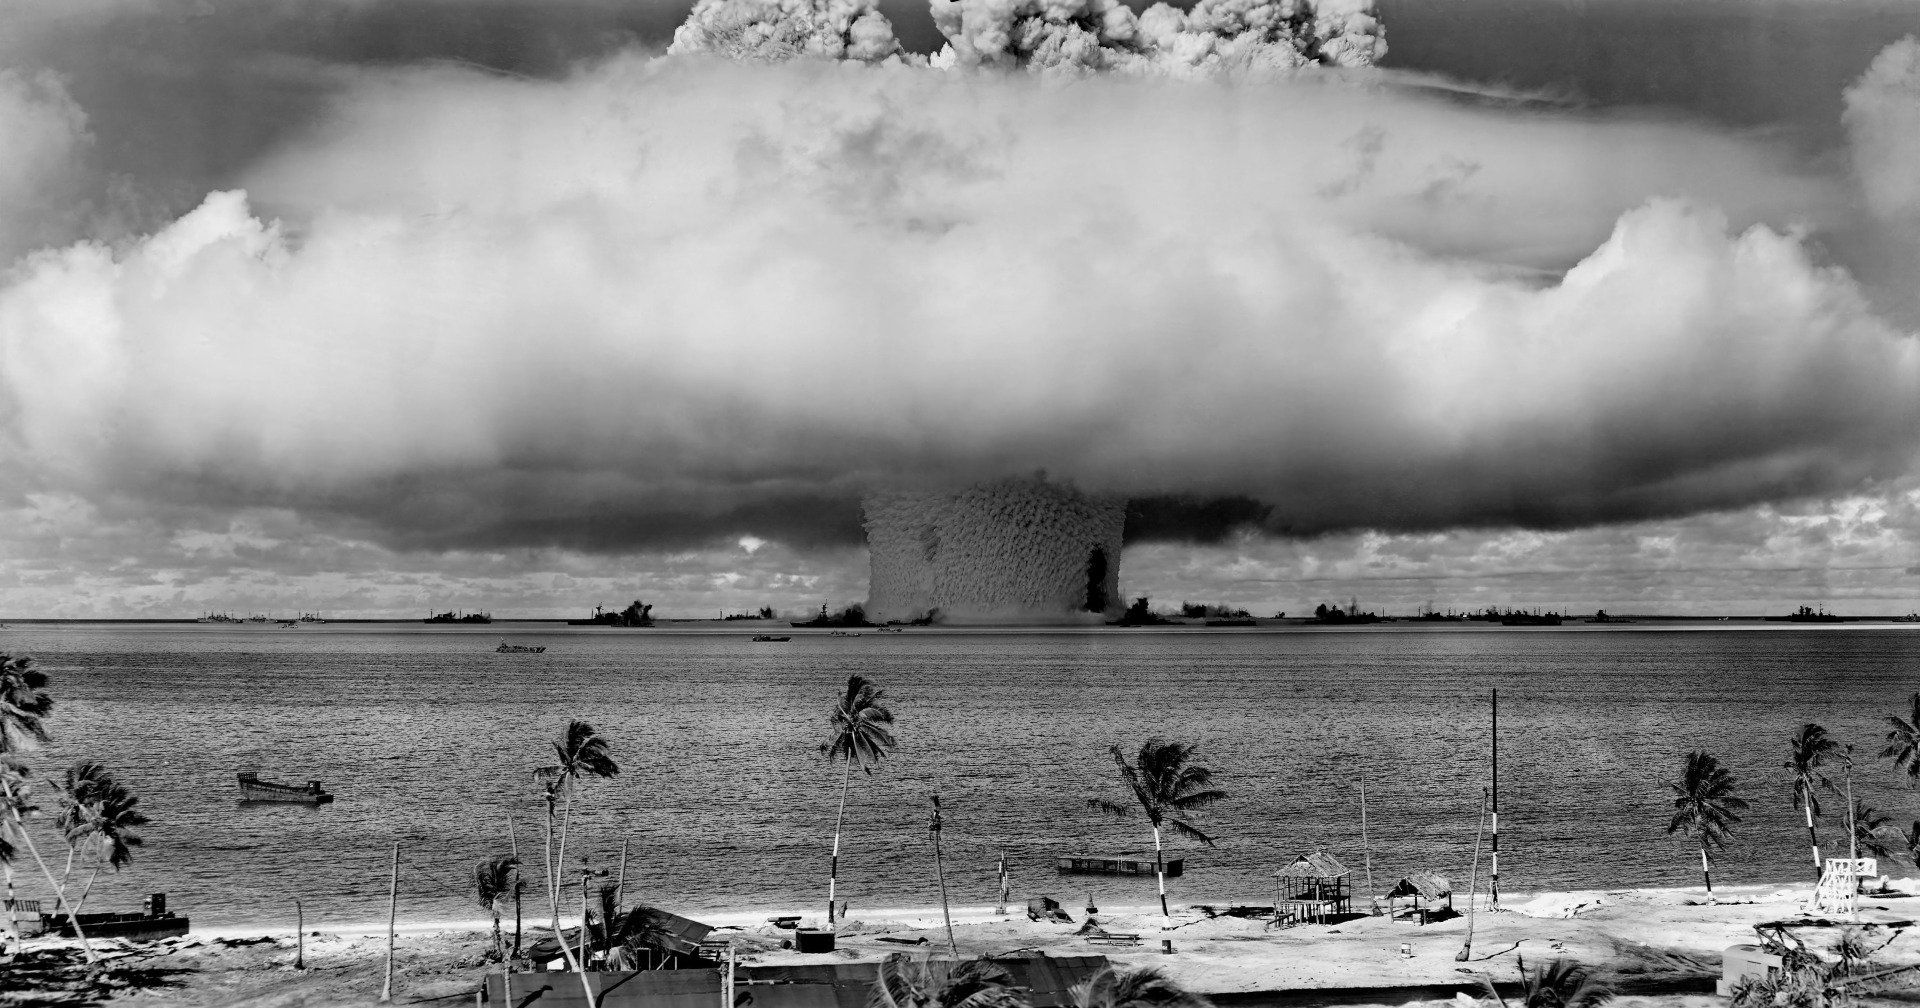 You can survive nuclear fallout if you prepare for it